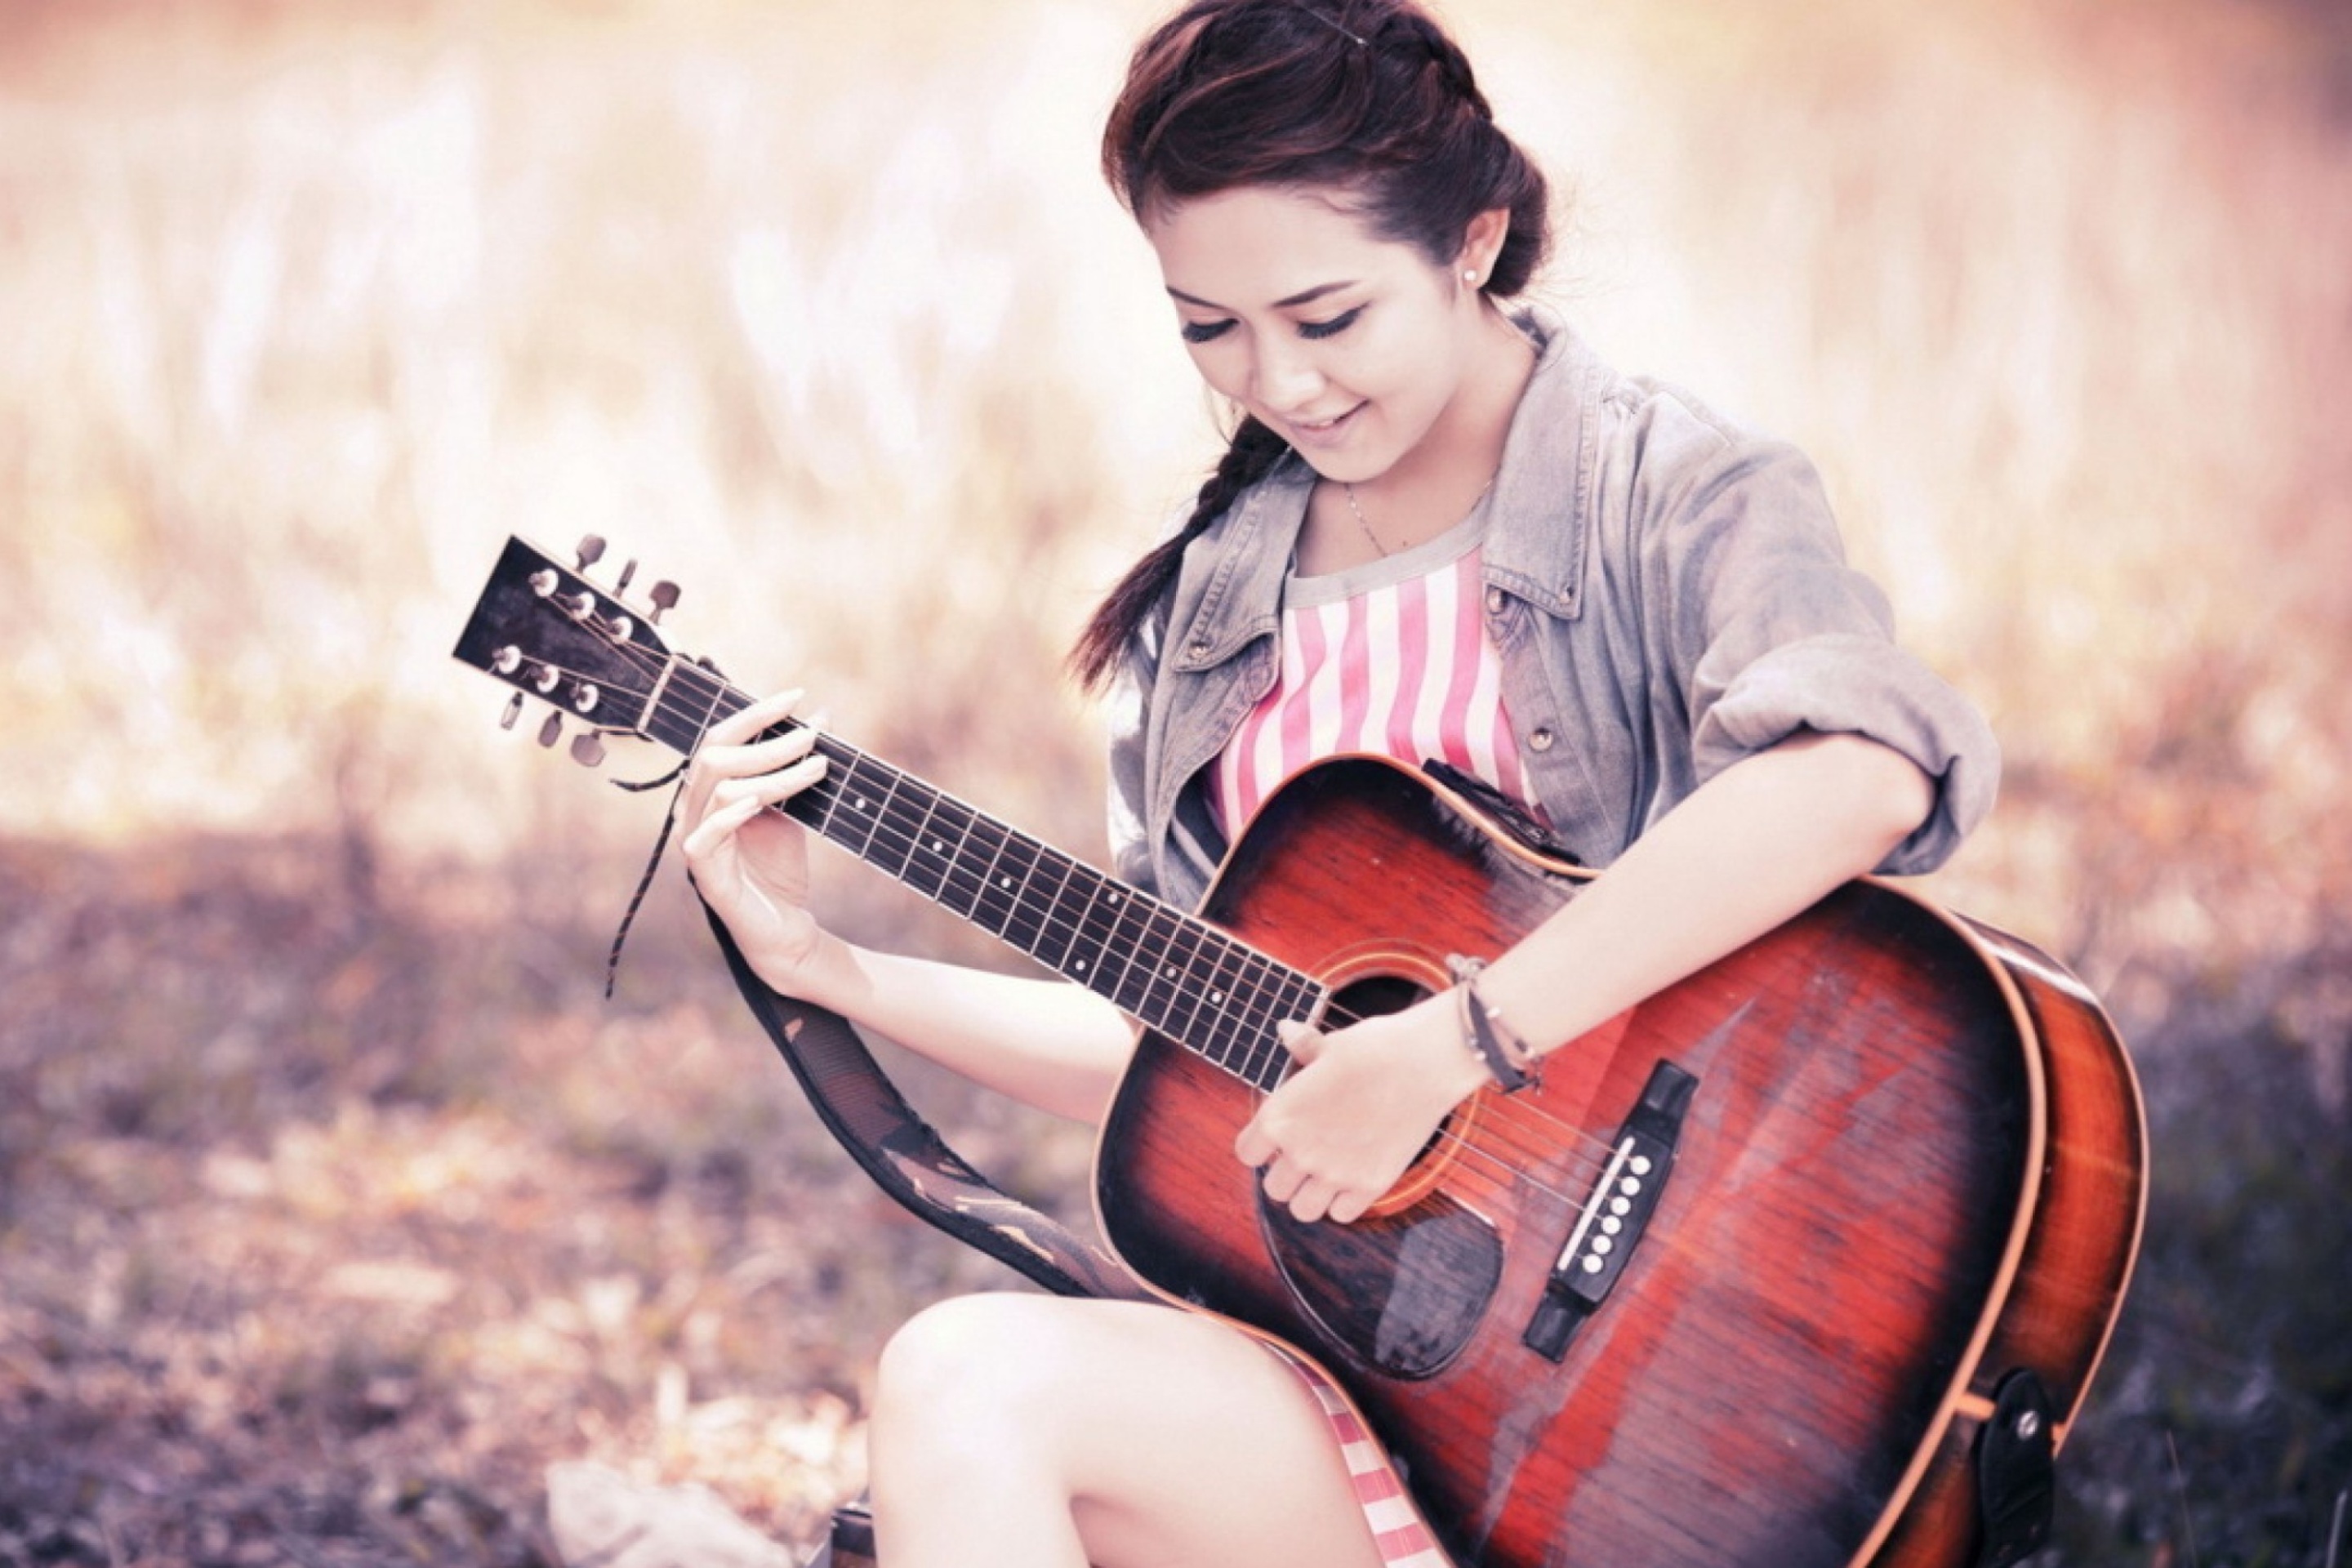 Das Chinese girl with guitar Wallpaper 2880x1920